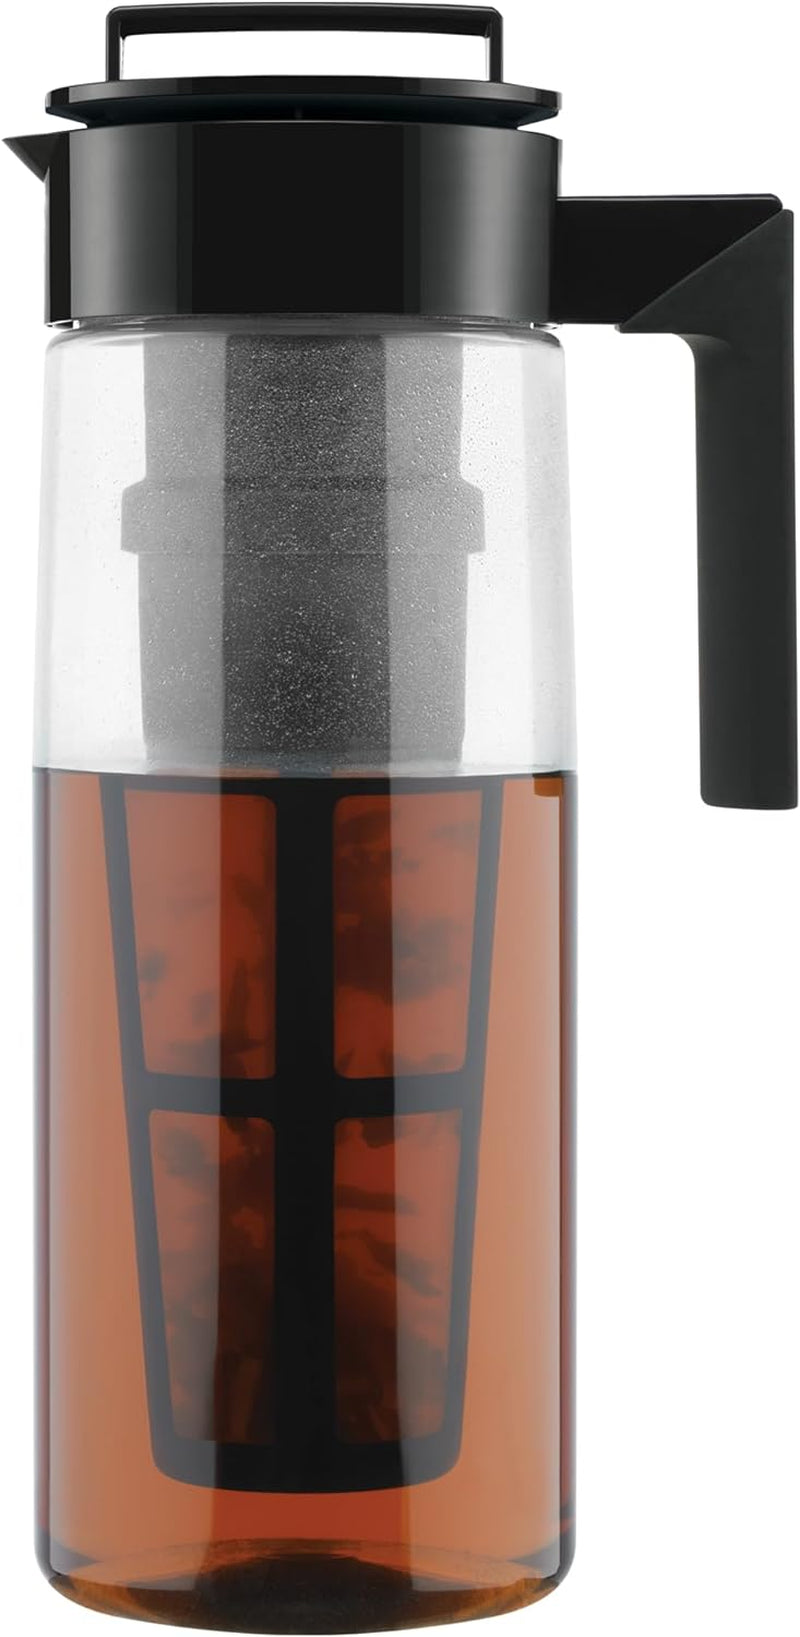 Takeya Premium Quality Iced Tea Maker with Patented Flash Chill Technology Made in the USA, BPA Free, 2 qt, Blueberry